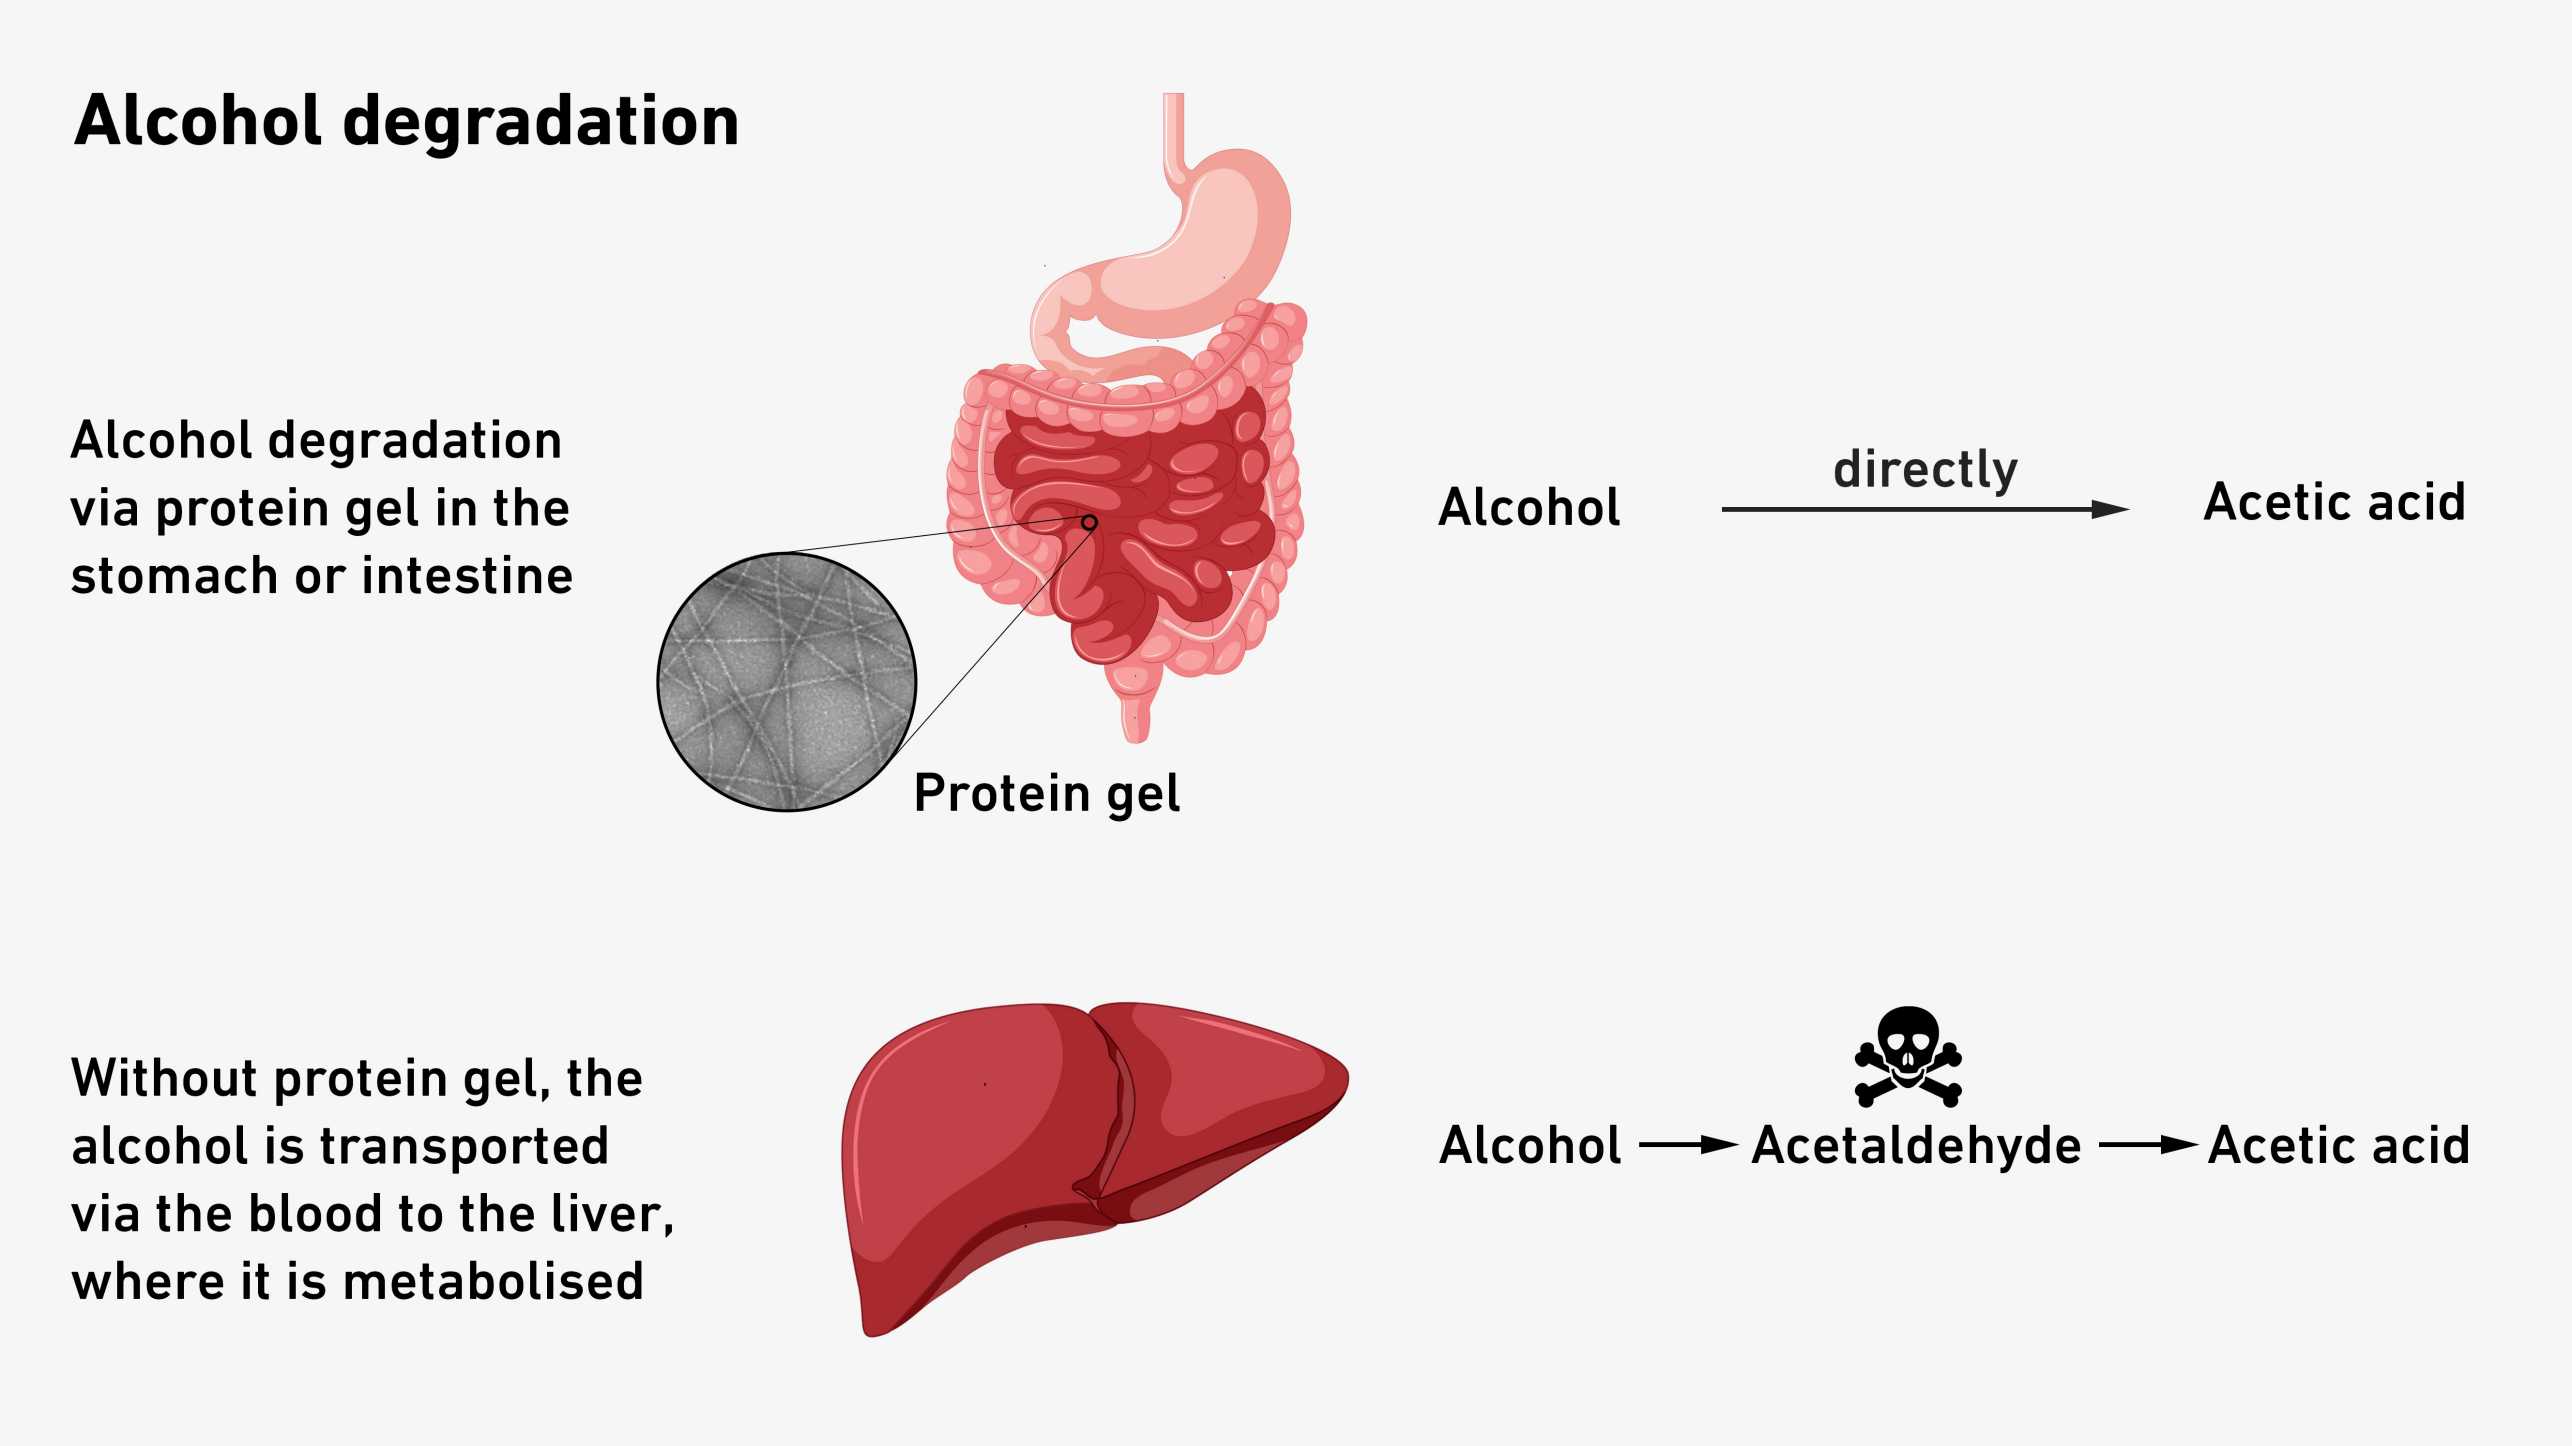 The illustration shows how the alcohol is broken down in the stomach or intestine via the protein gel. Without the protein gel, the alcohol reaches the liver via the blood and is broken down there.